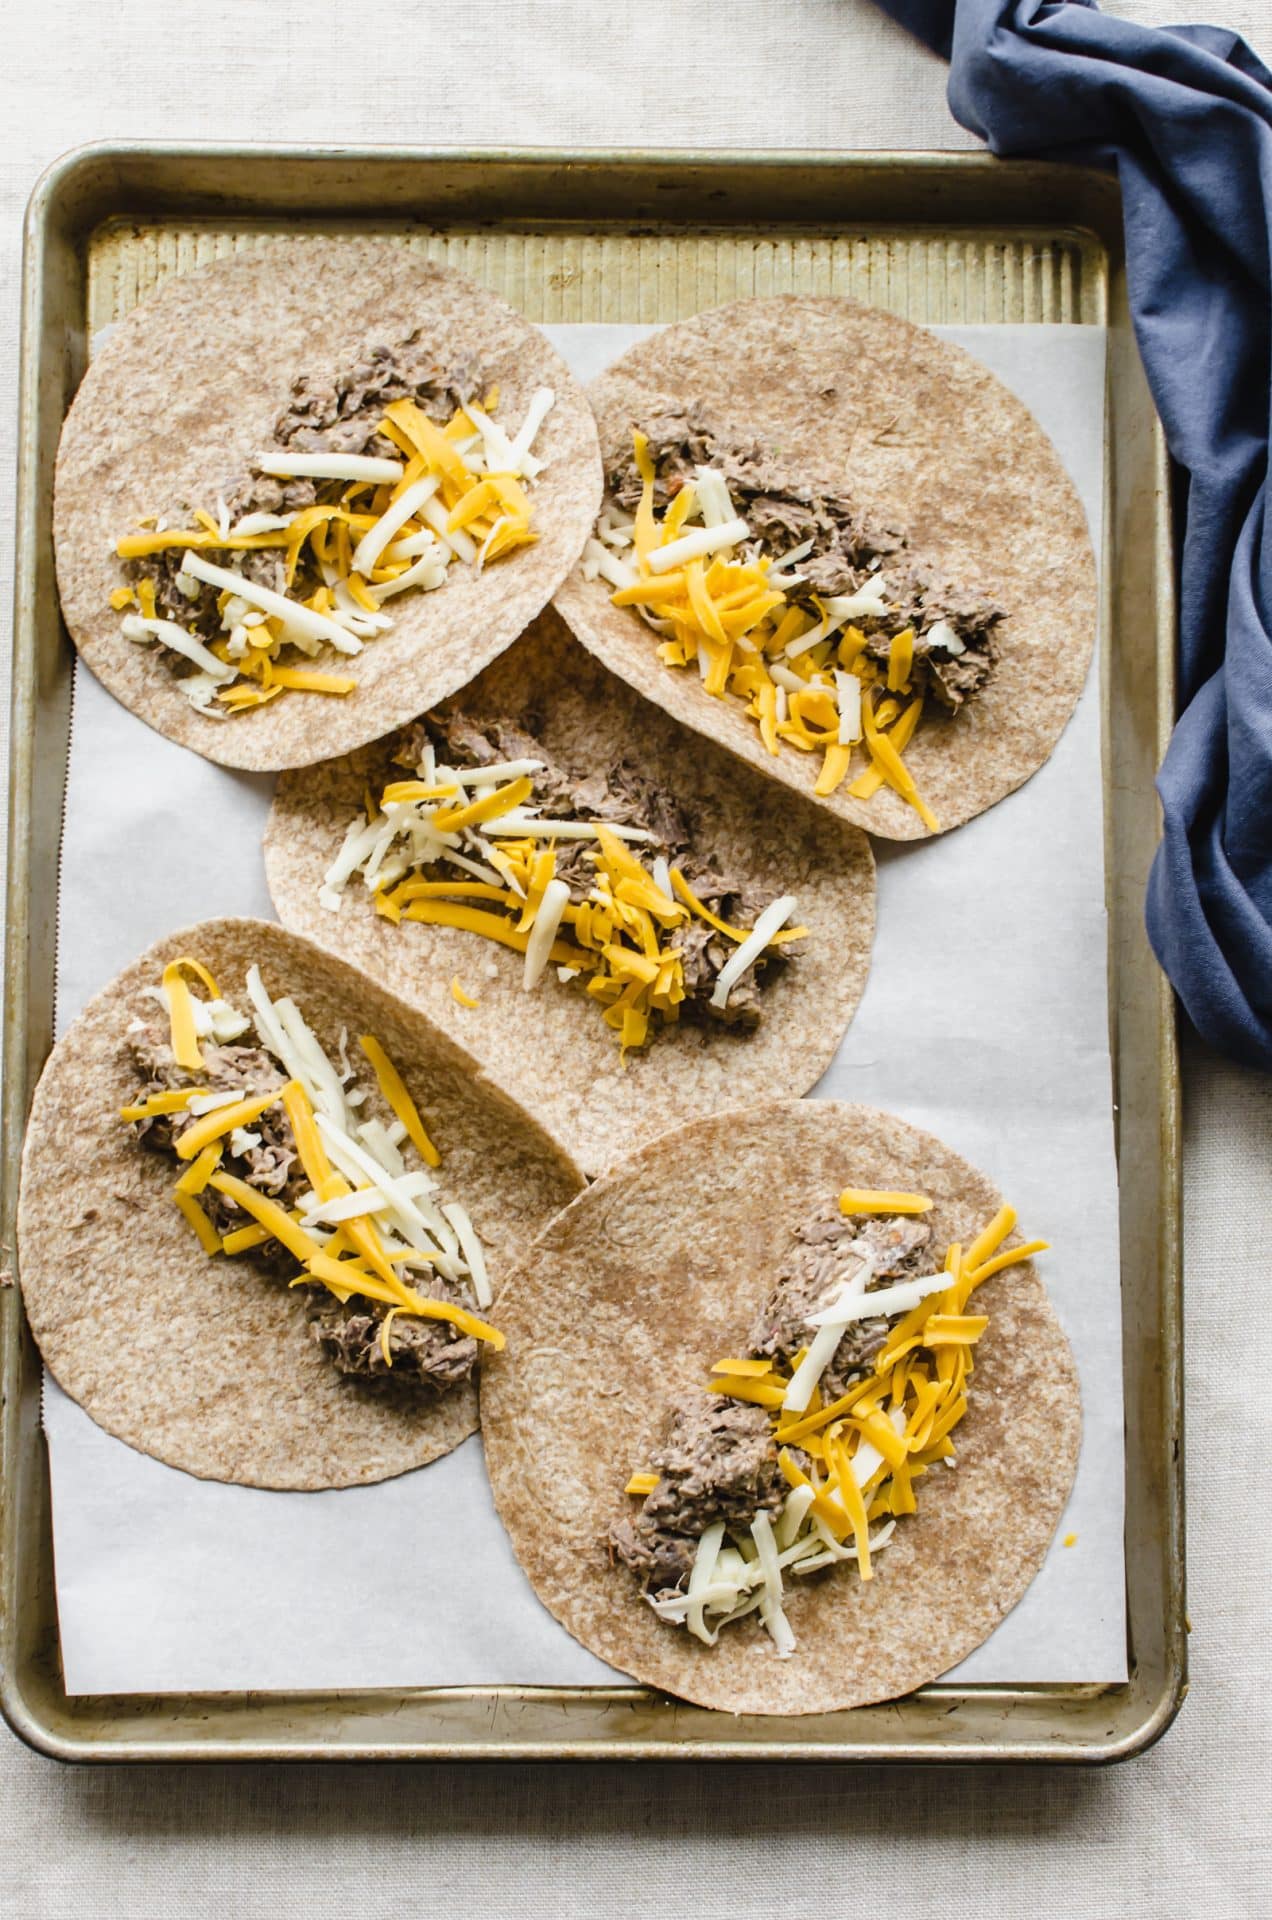 Tortillas on a sheet pan with shredded beef and cheese in the center.